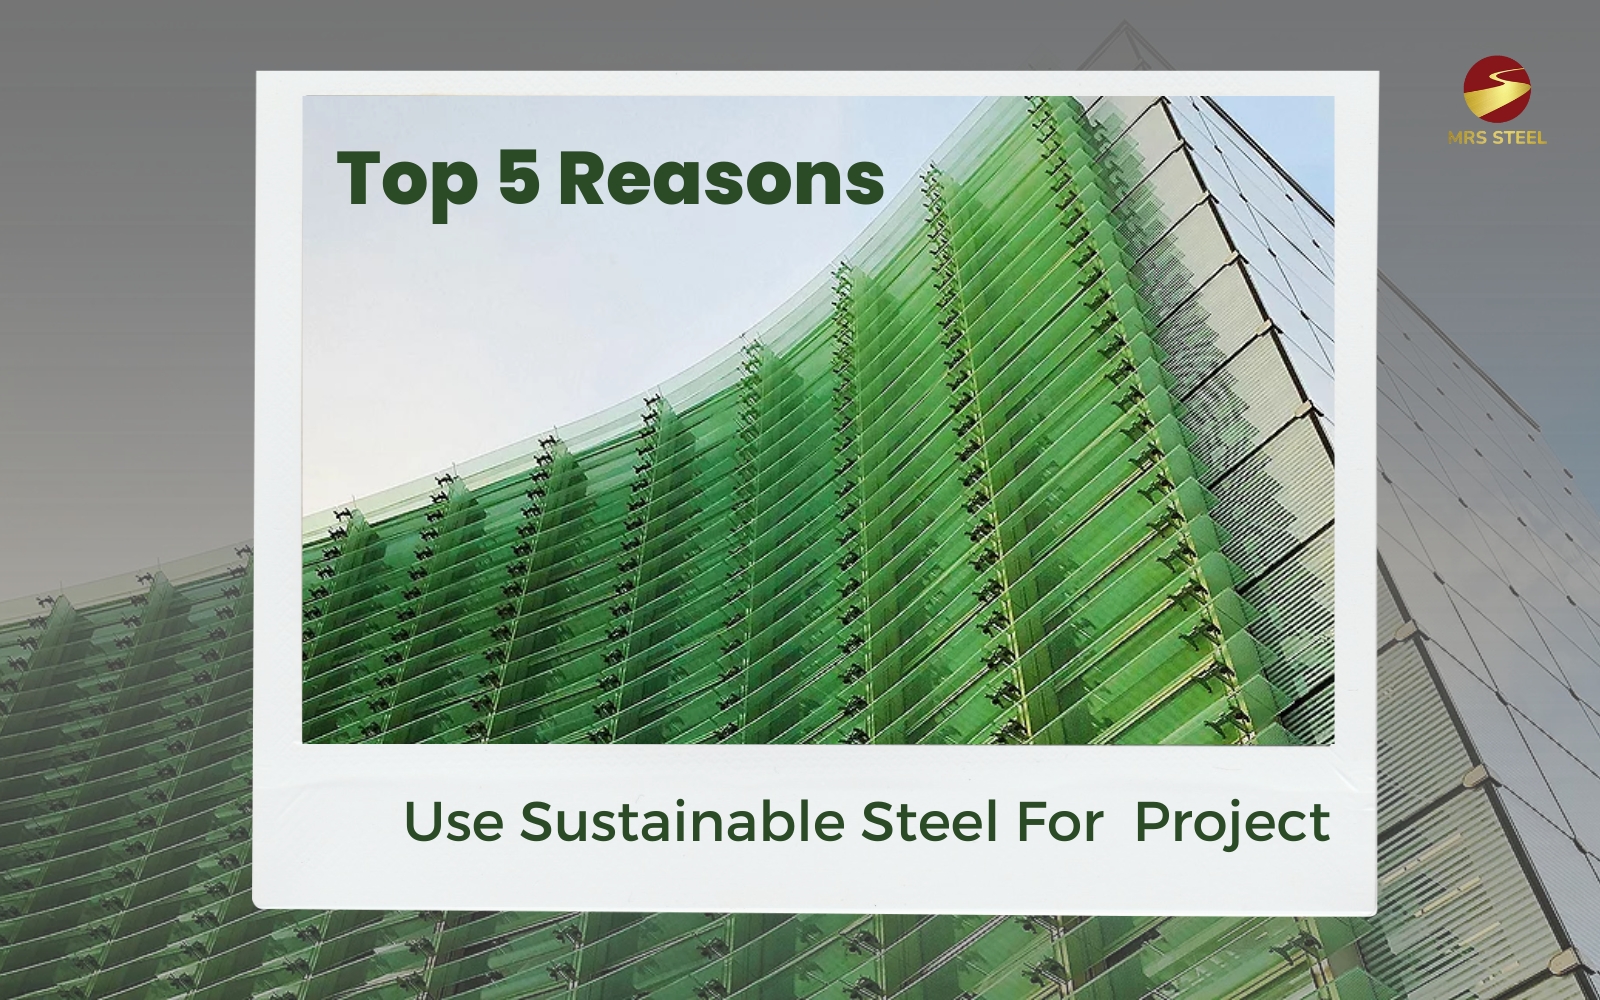 Top 5 Reasons To Use Sustainable Steel For Your Project